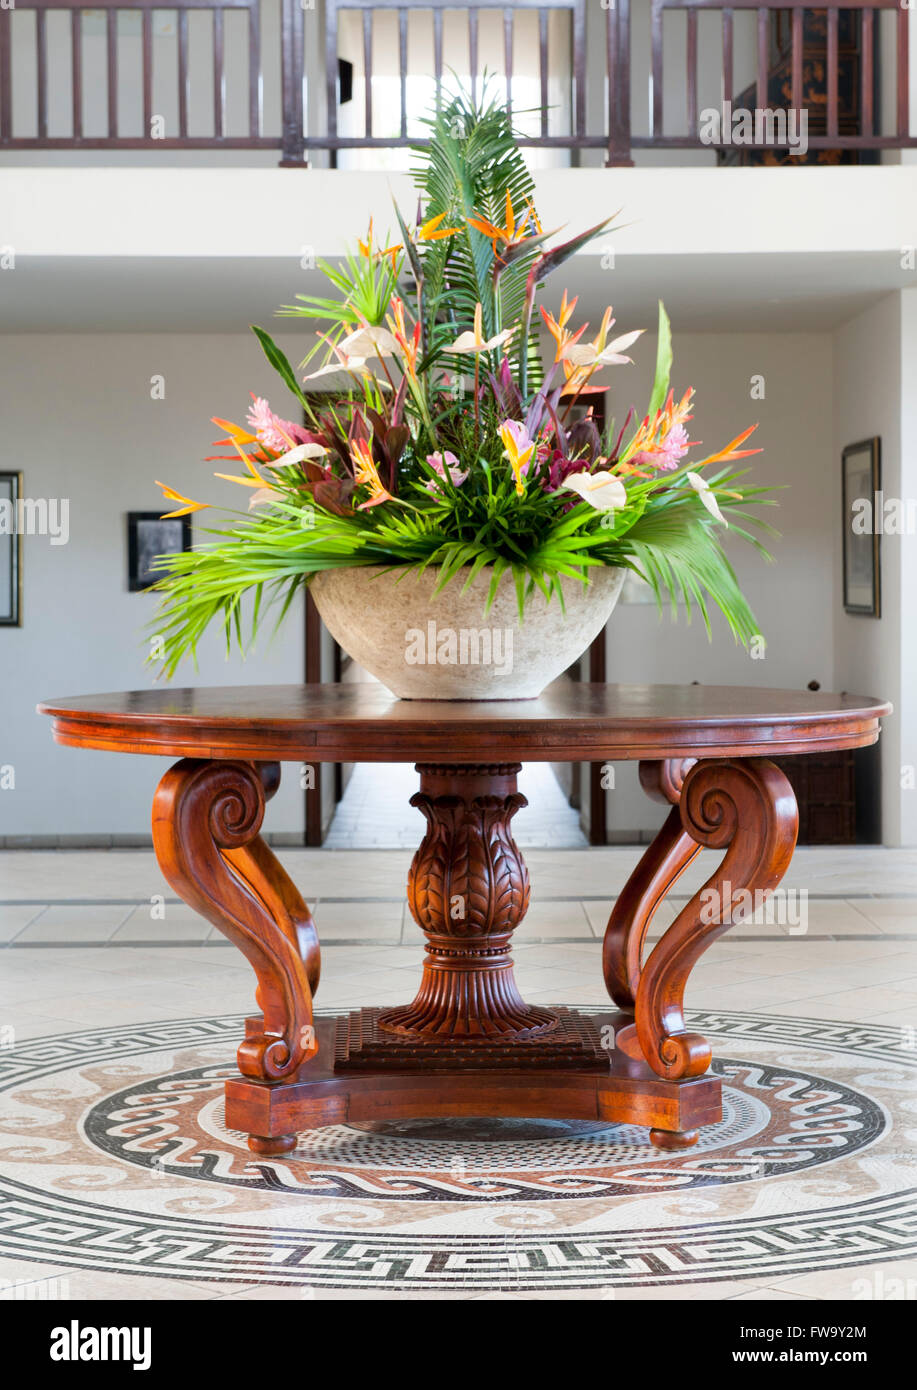 Flower Arrangement In The Lobby Of The Residence Hotel In Mauritius Stock Photo Alamy